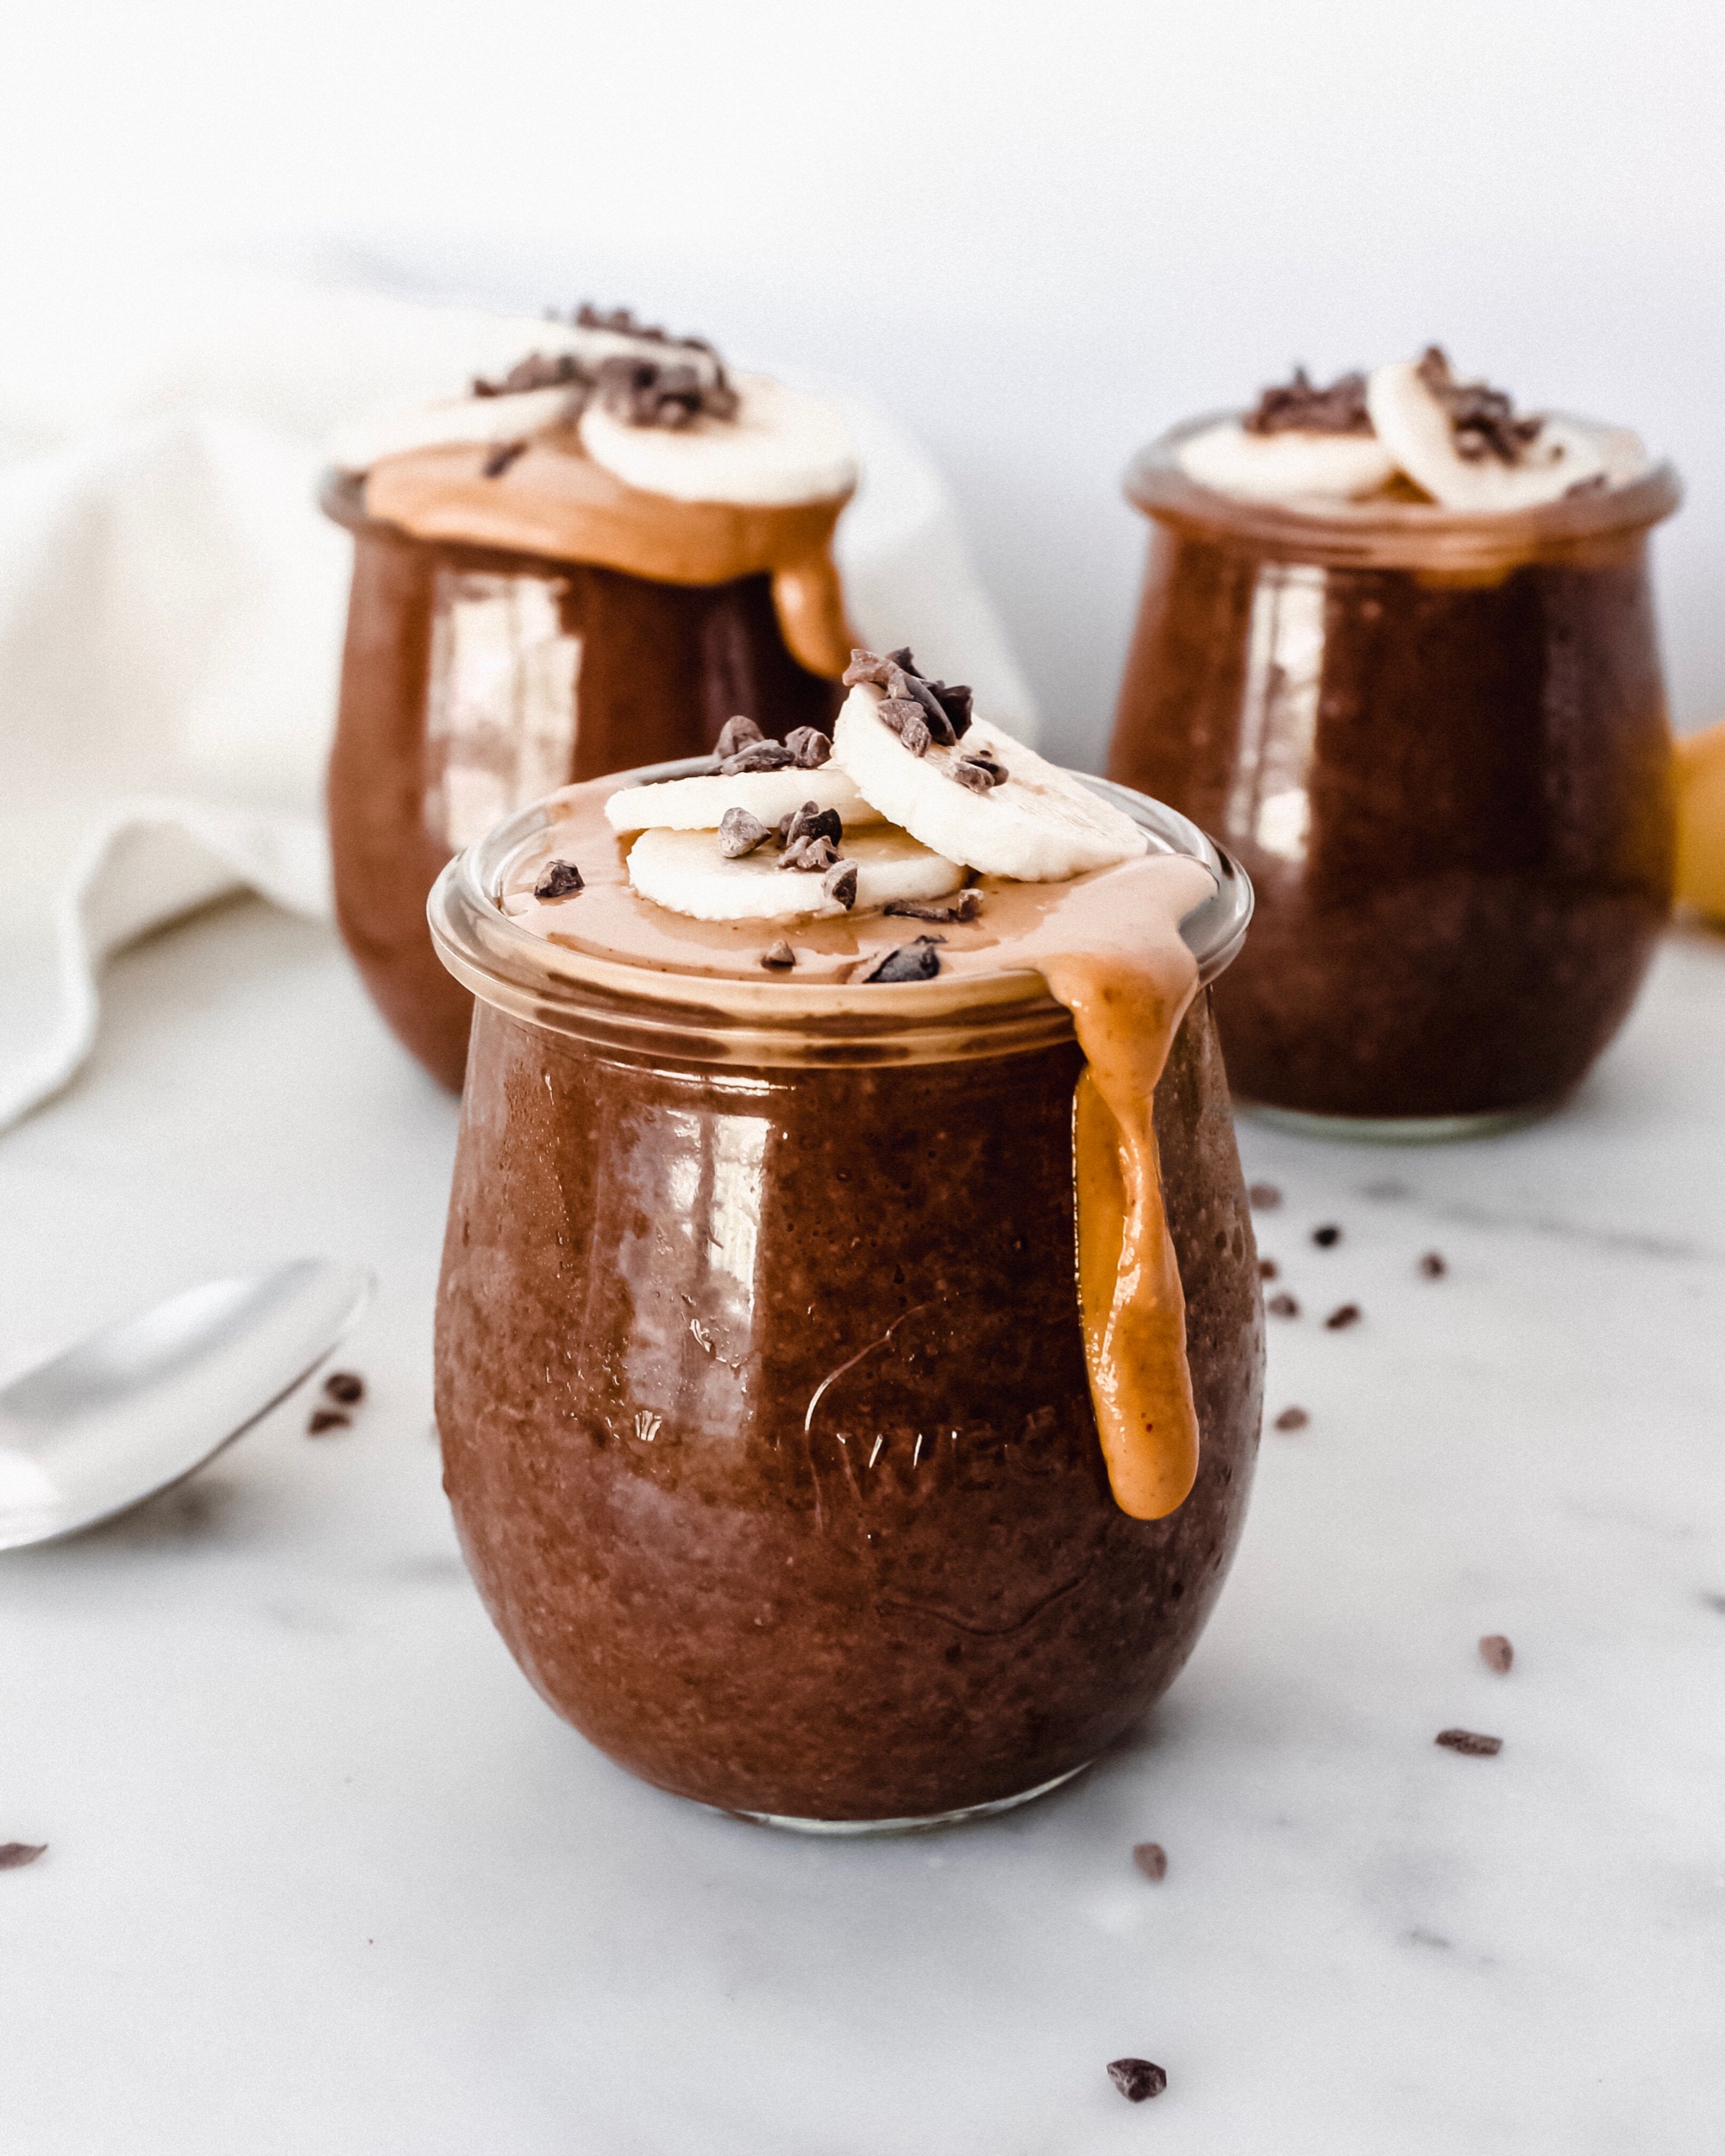 Chocolate Nut Butter Chia Seed Pudding — Busy Girl Baking